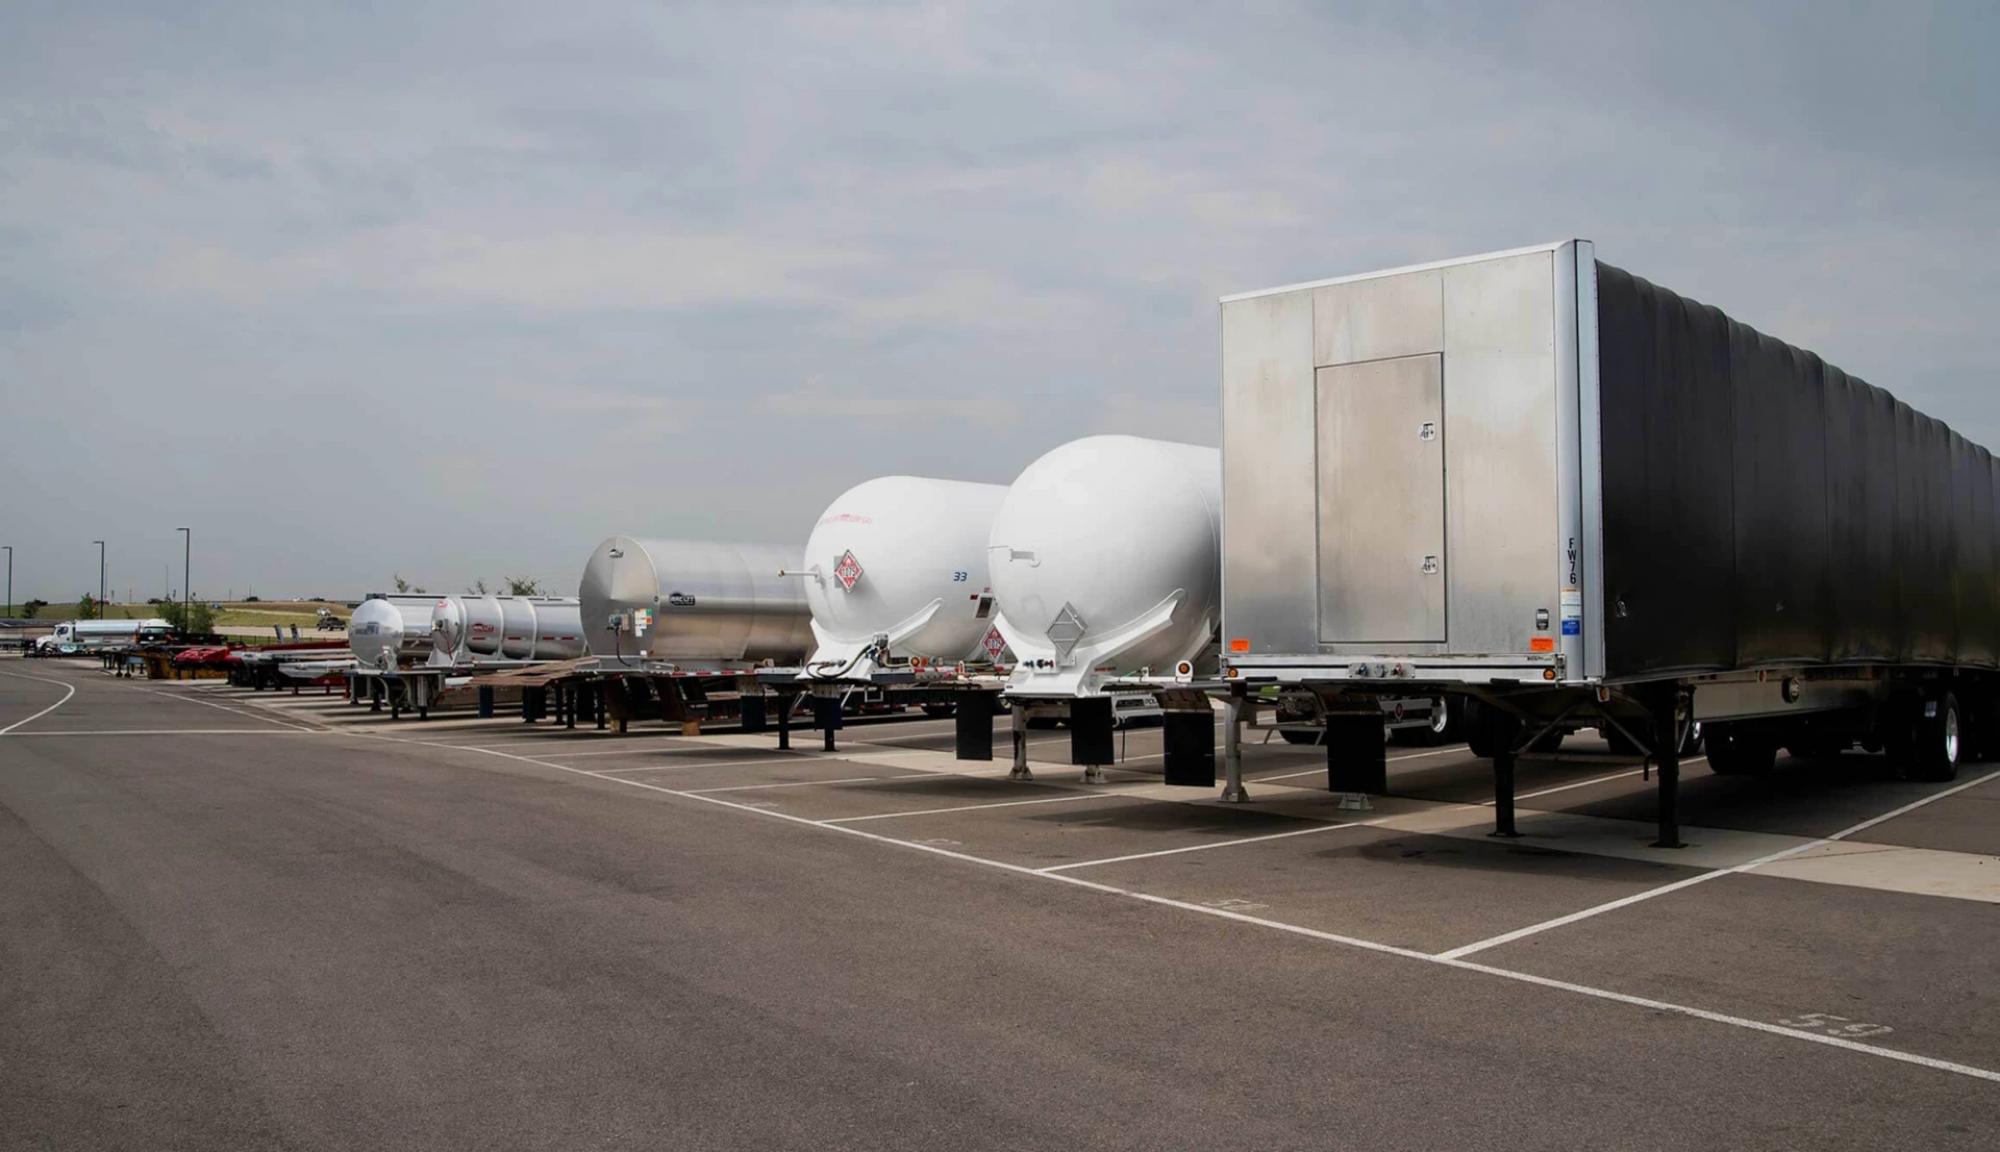 Trailers in parking lot